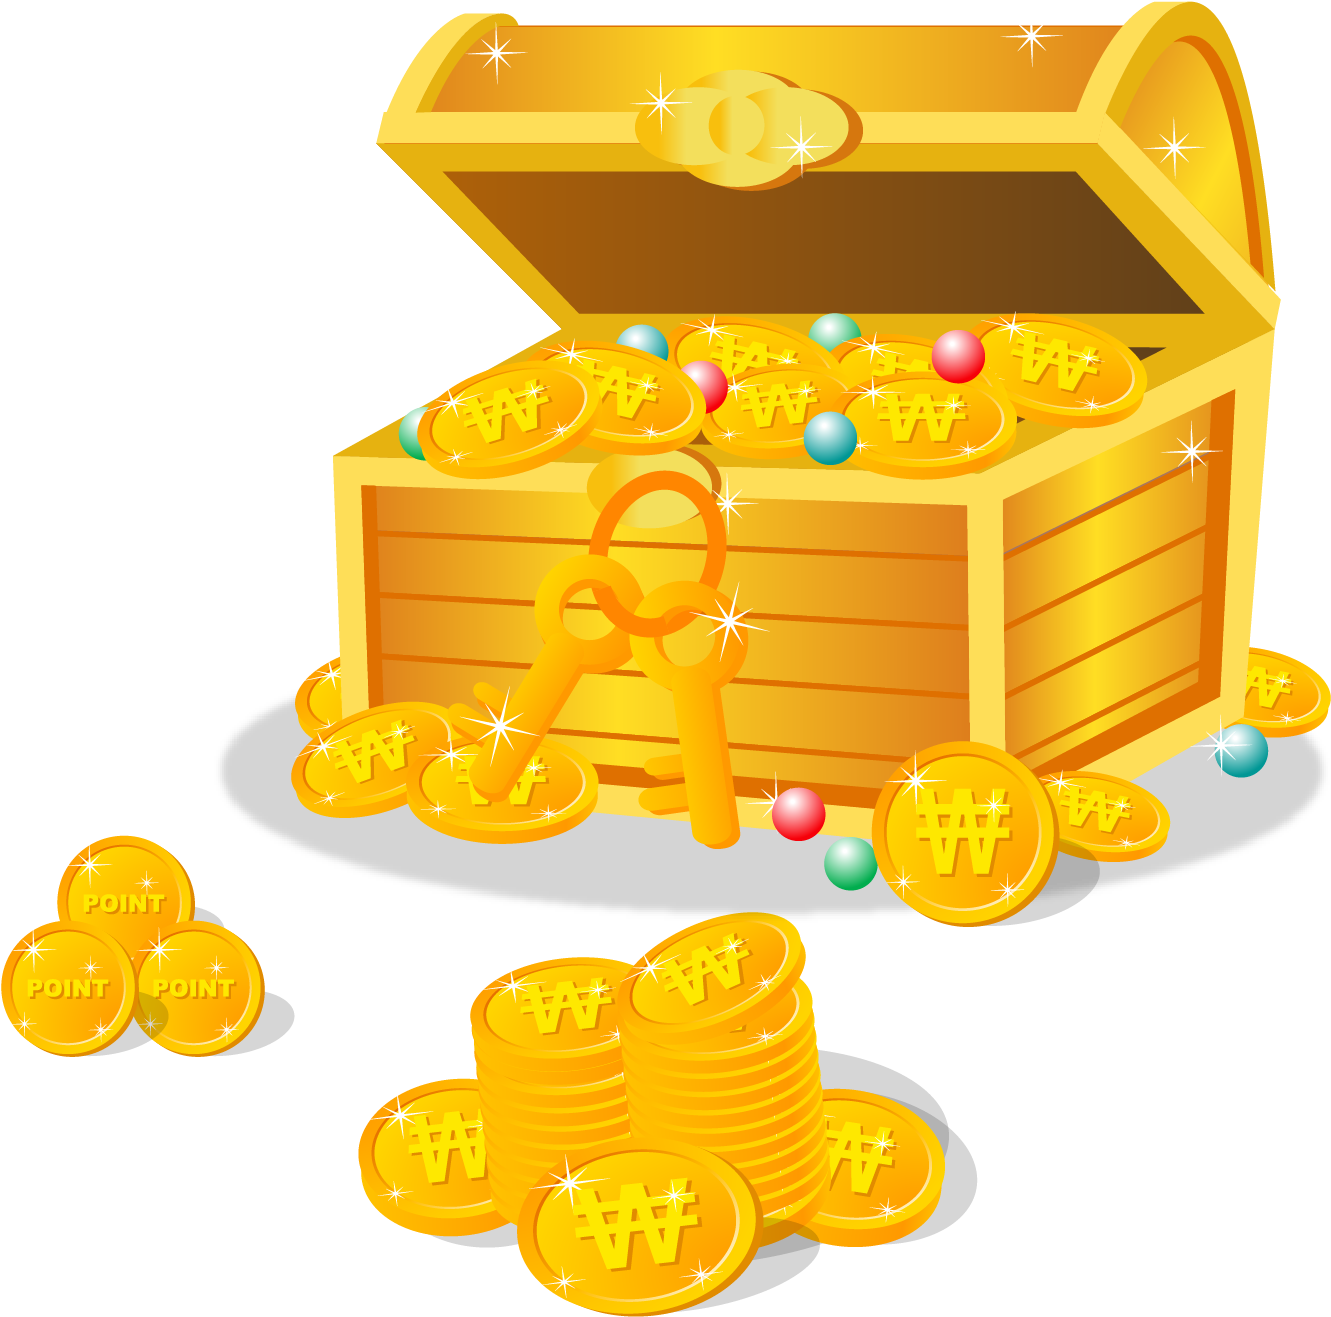 A Gold Chest Full Of Coins